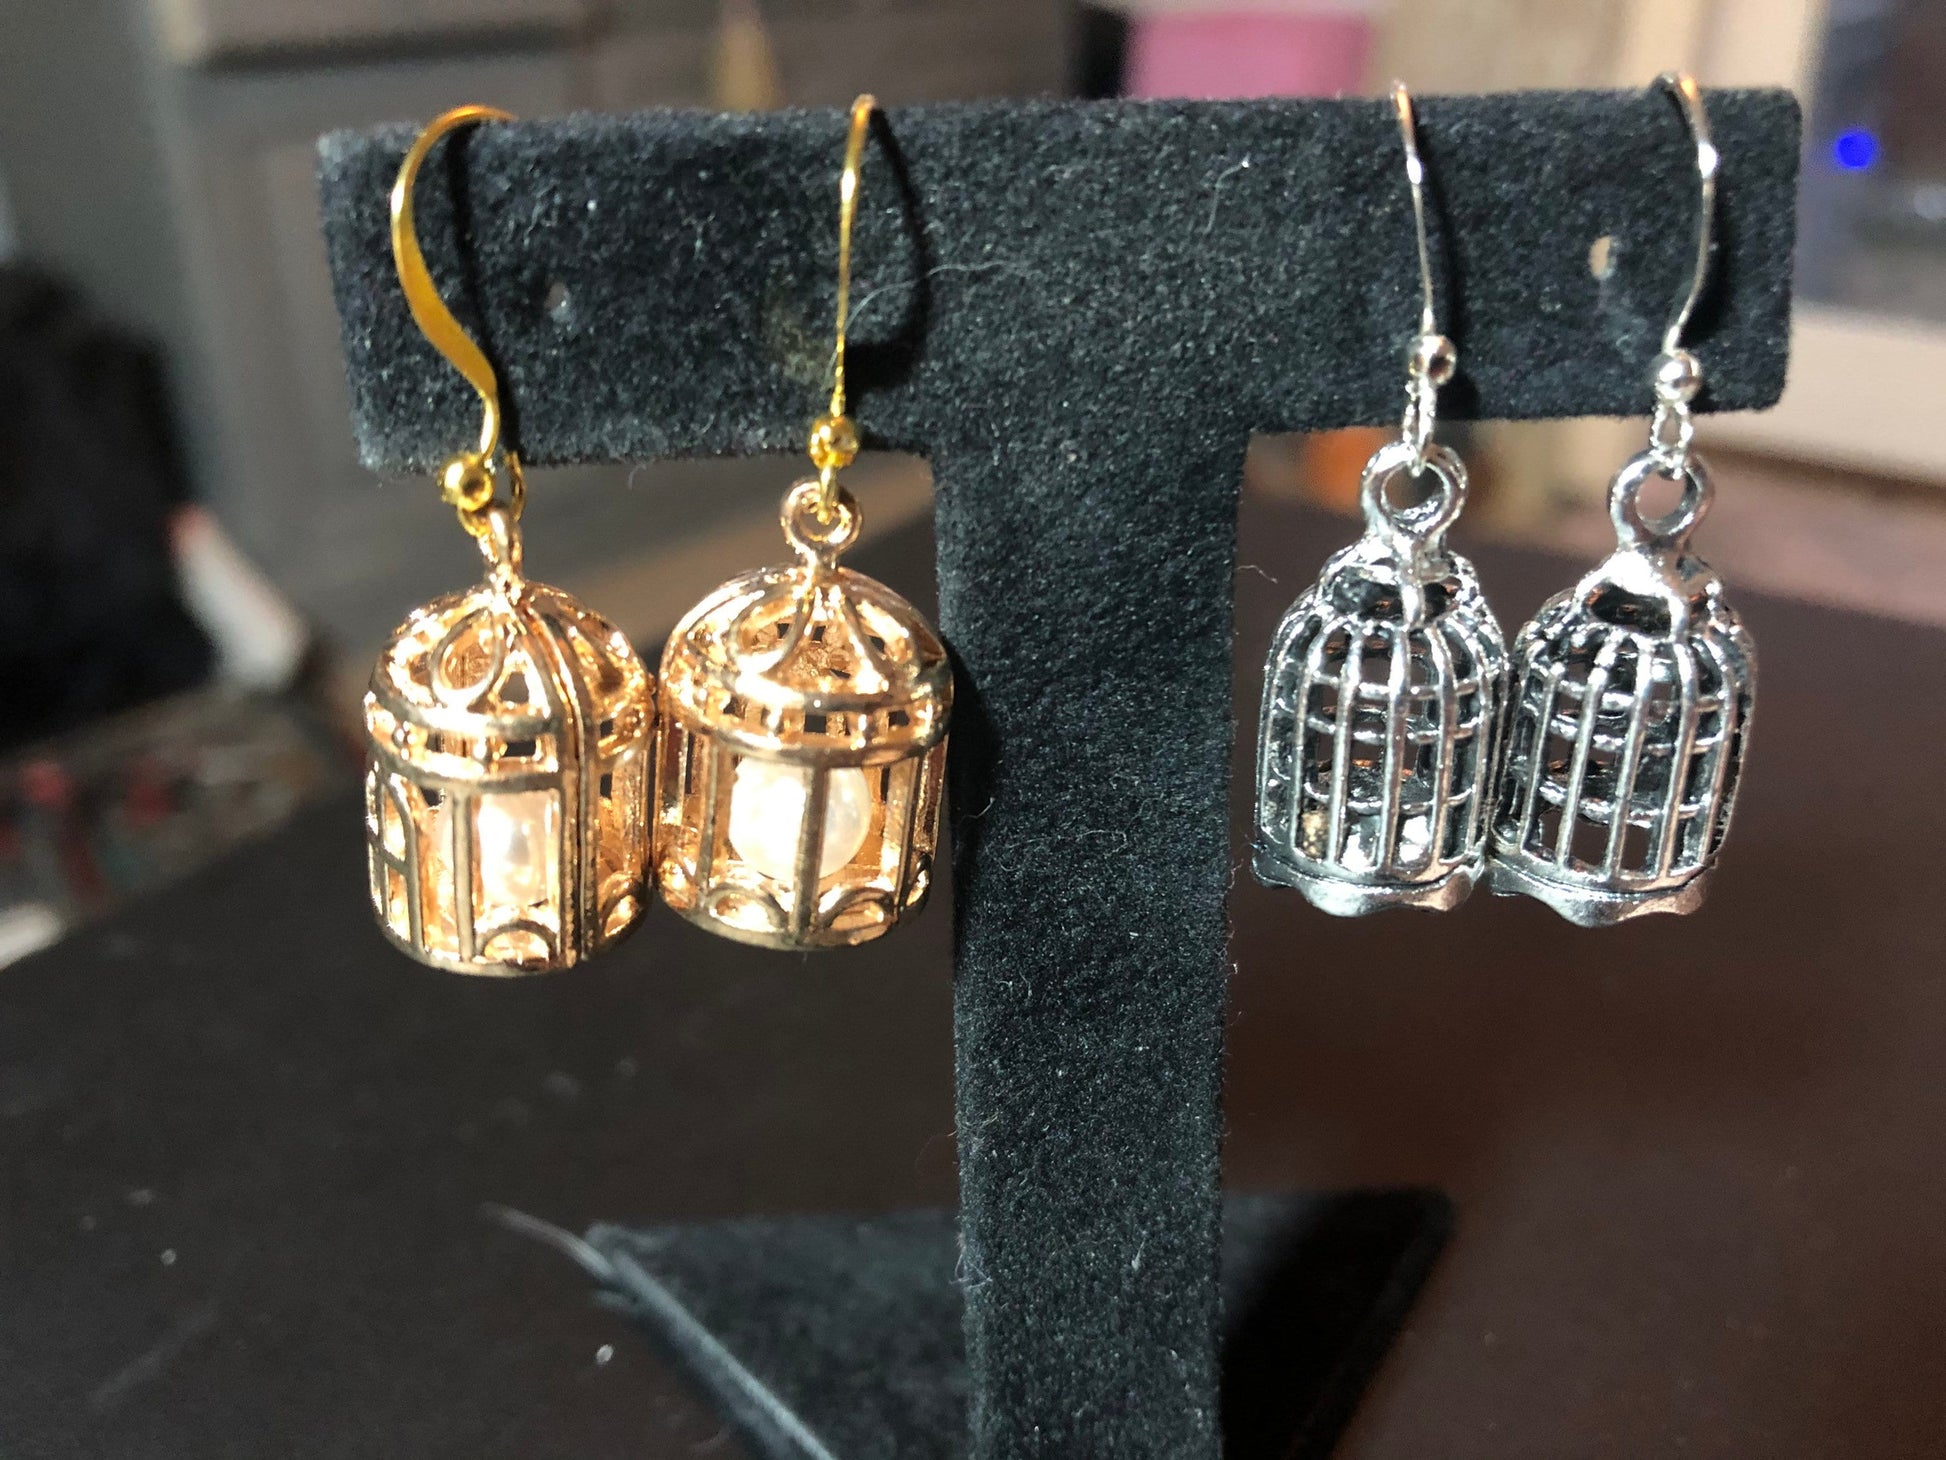 Vintage style gold tone bird cage earrings with inner Pearl pierced ears